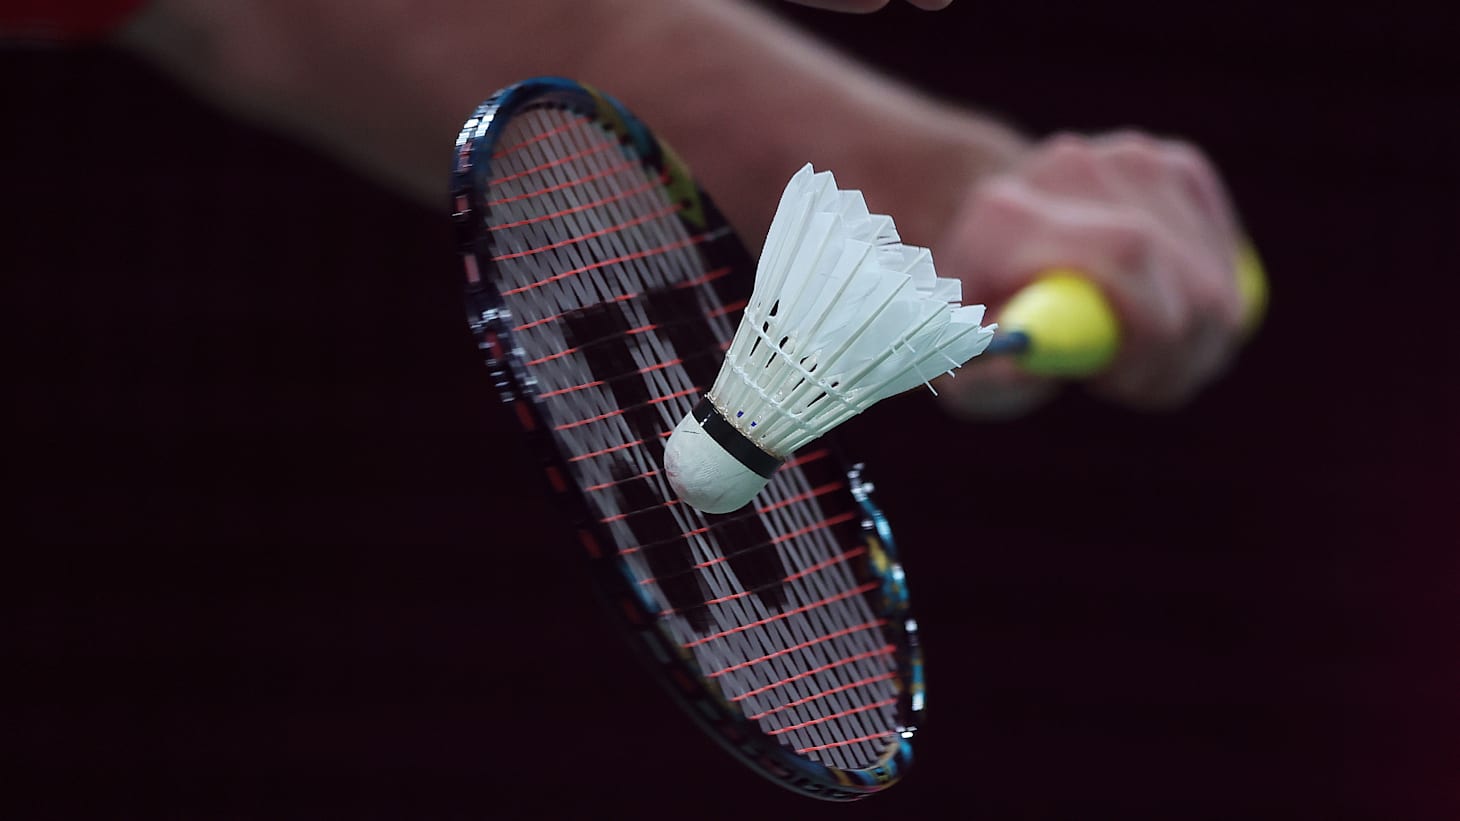 China Masters badminton 2023: India's campaign ends early - all 